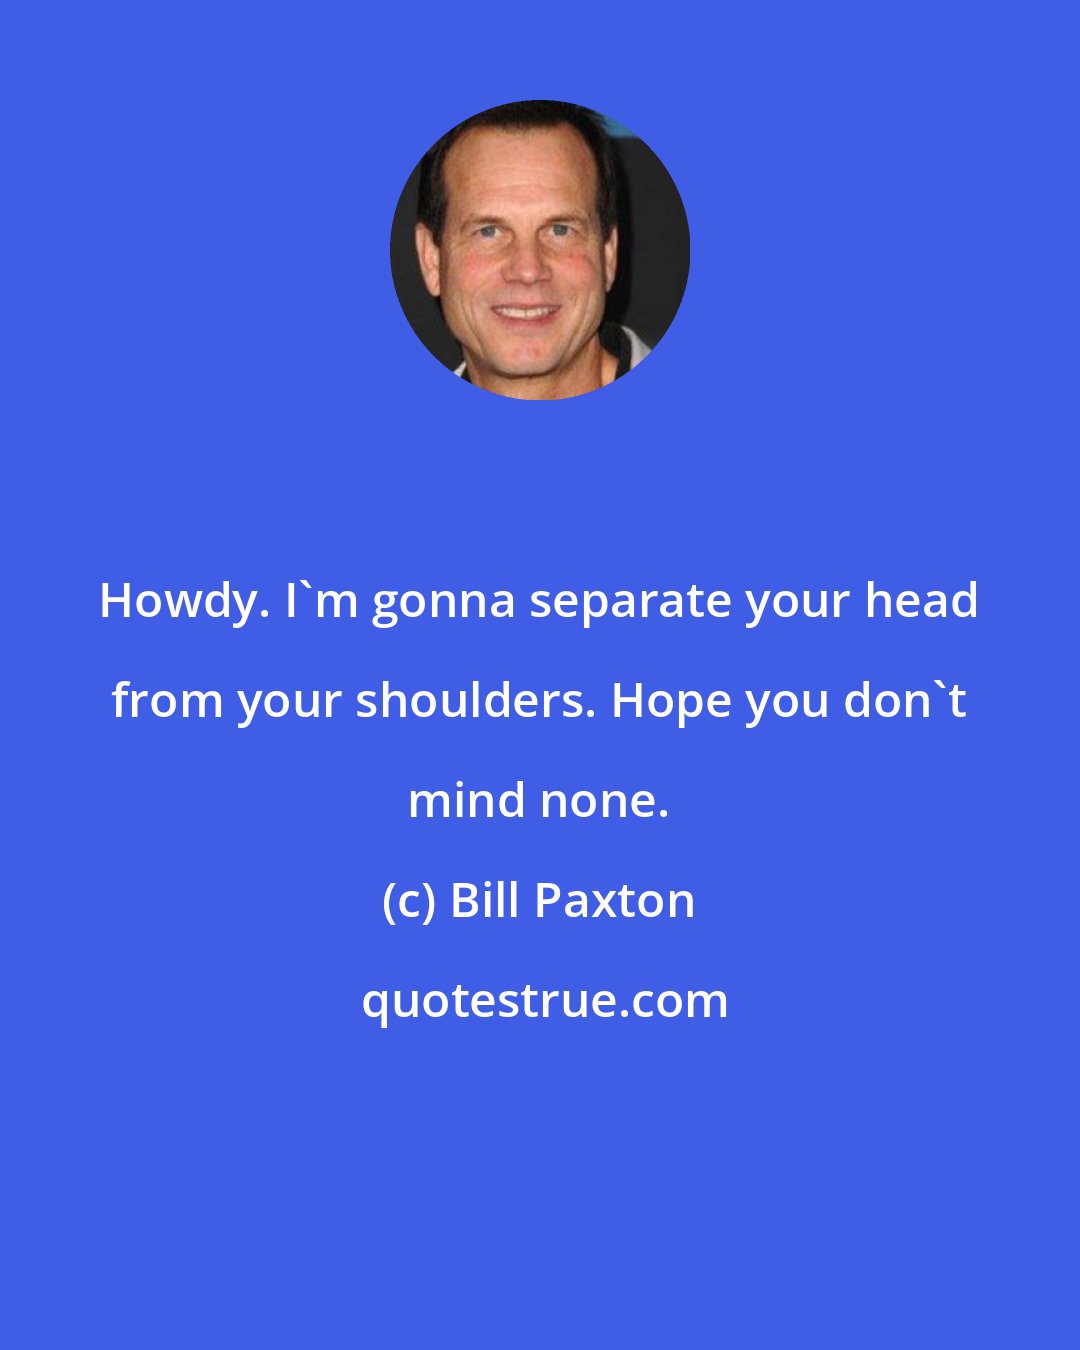 Bill Paxton: Howdy. I'm gonna separate your head from your shoulders. Hope you don't mind none.